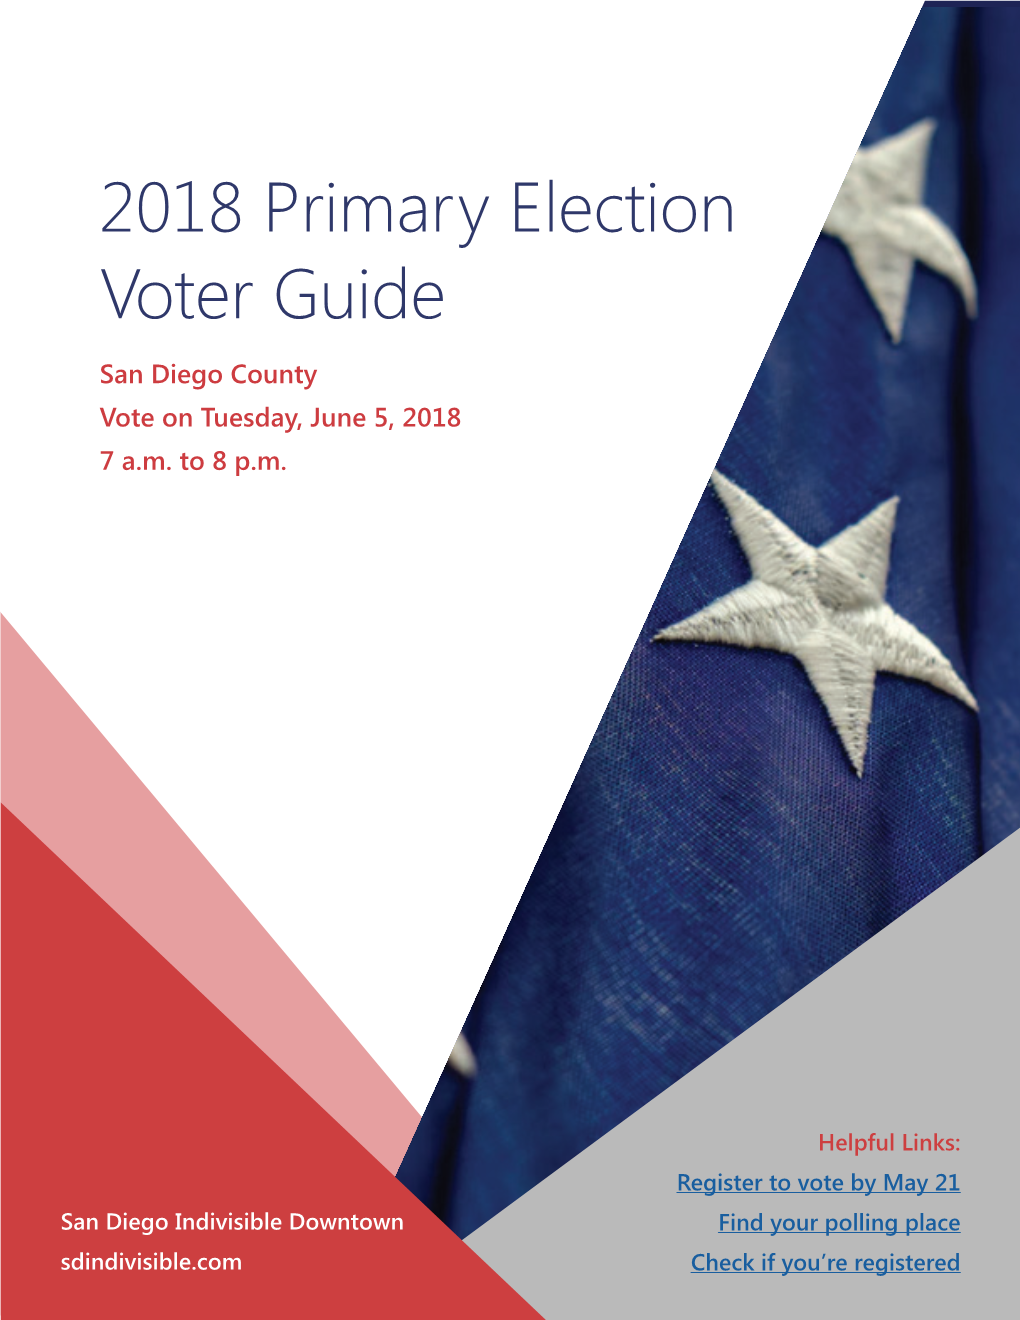 2018 Primary Election Voter Guide San Diego County Vote on Tuesday, June 5, 2018 7 A.M